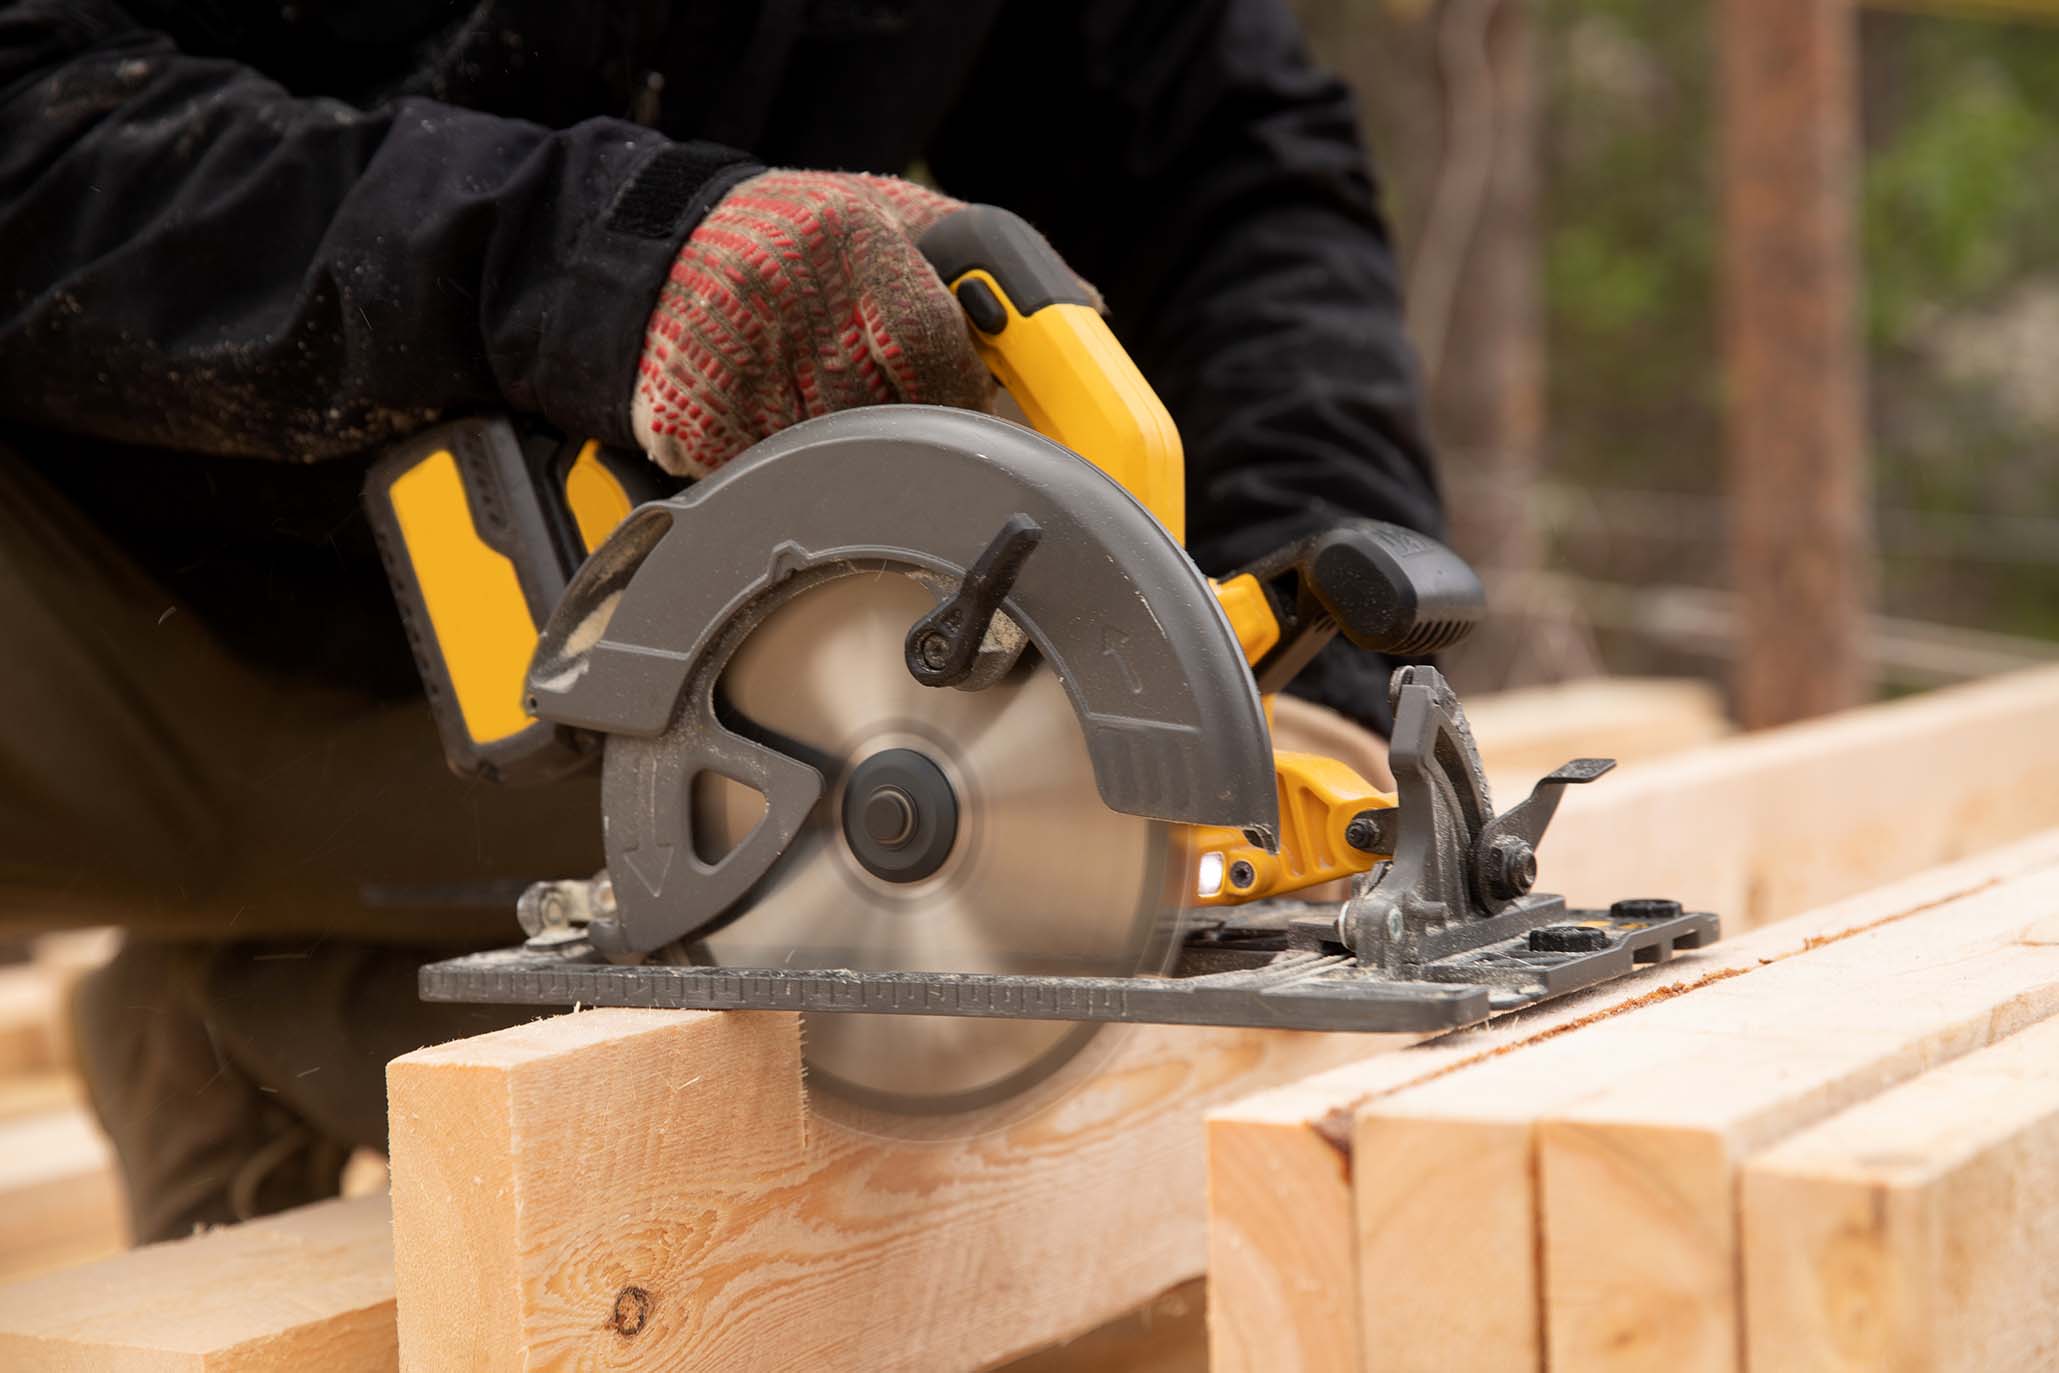 The List of Hand Tools Your Business Should Have - Grainger KnowHow